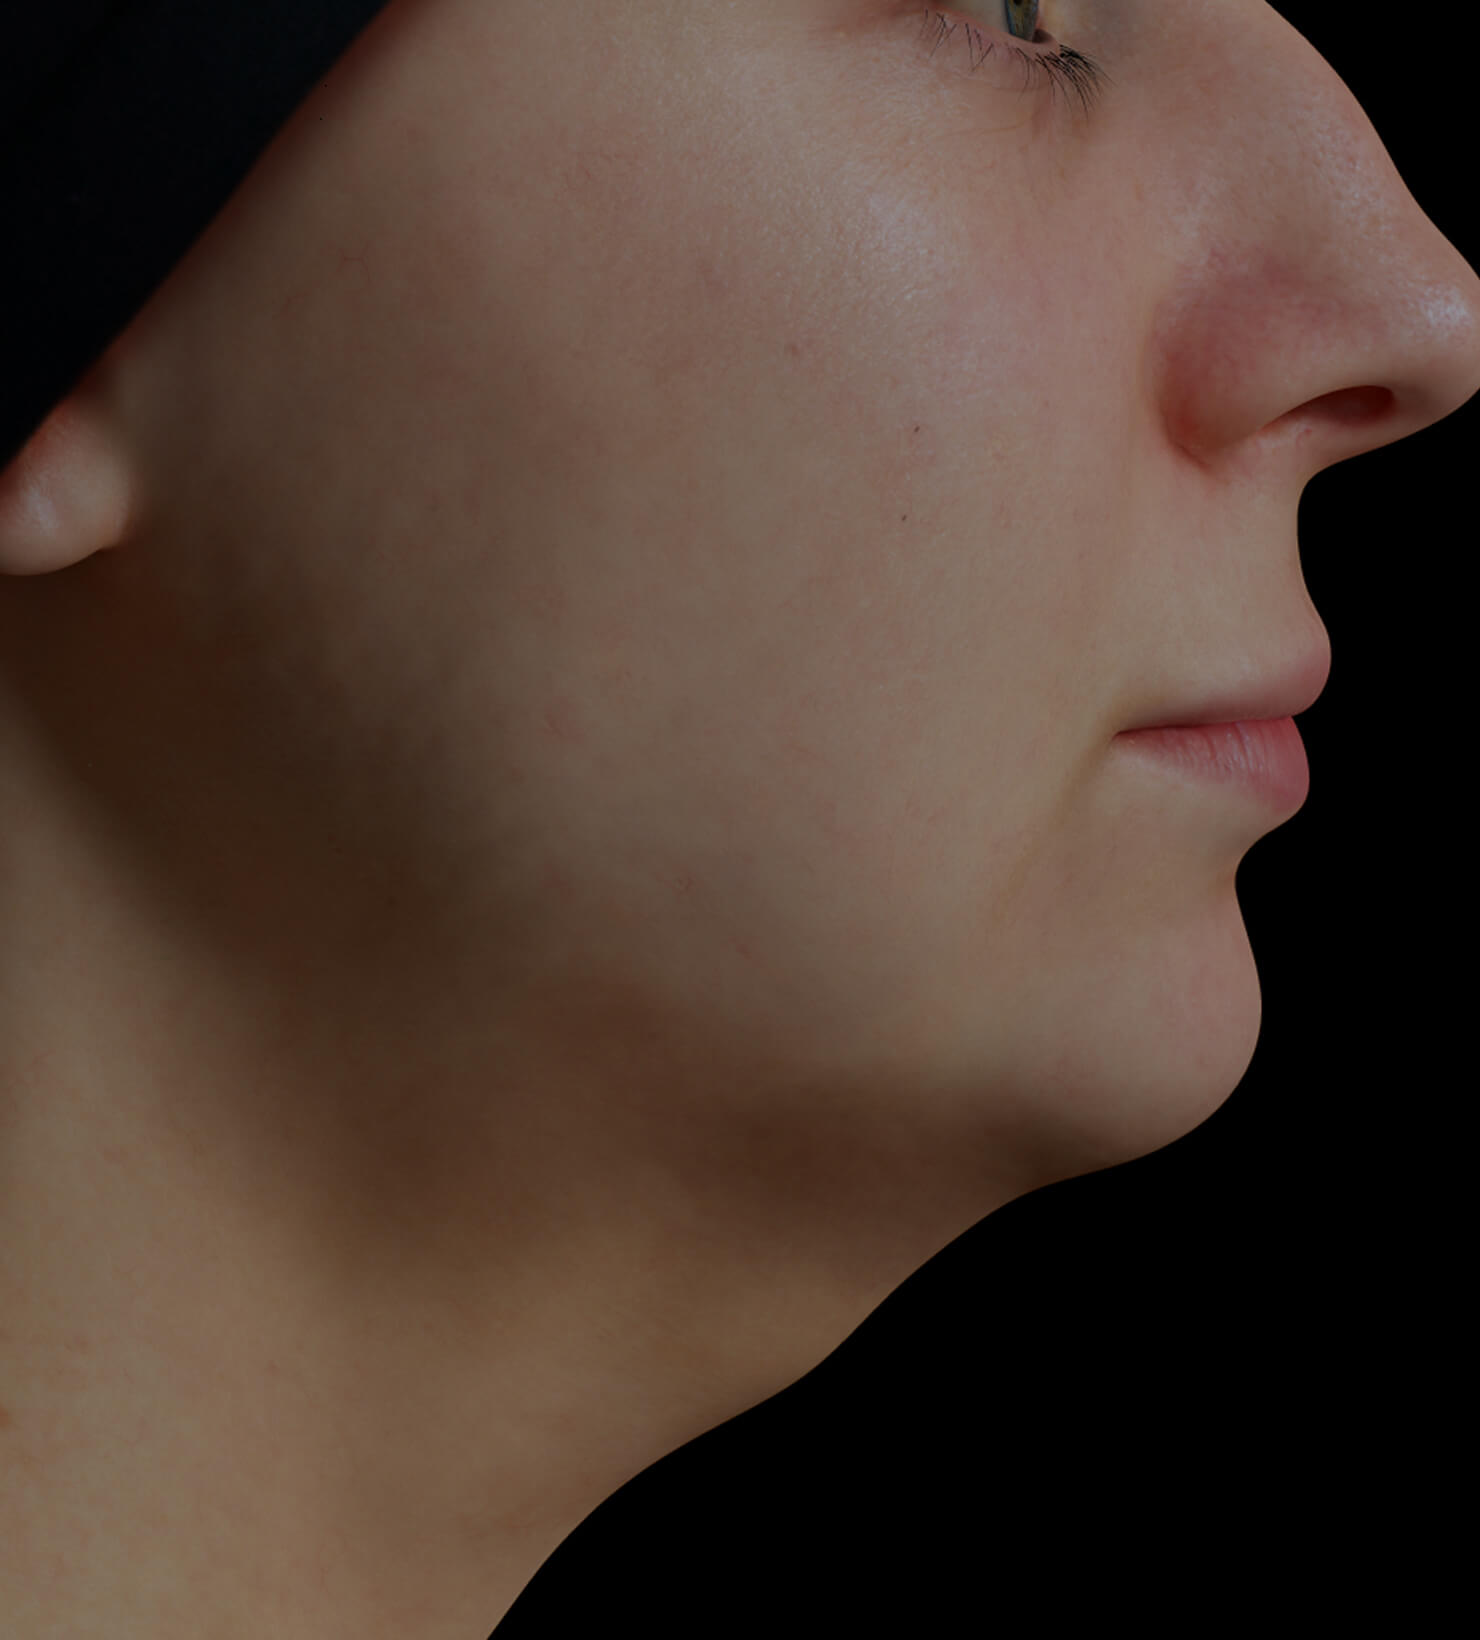 Clinique Chloé female patient with volume under the chin, or double chin, treated with Profound radiofrequency microneedling